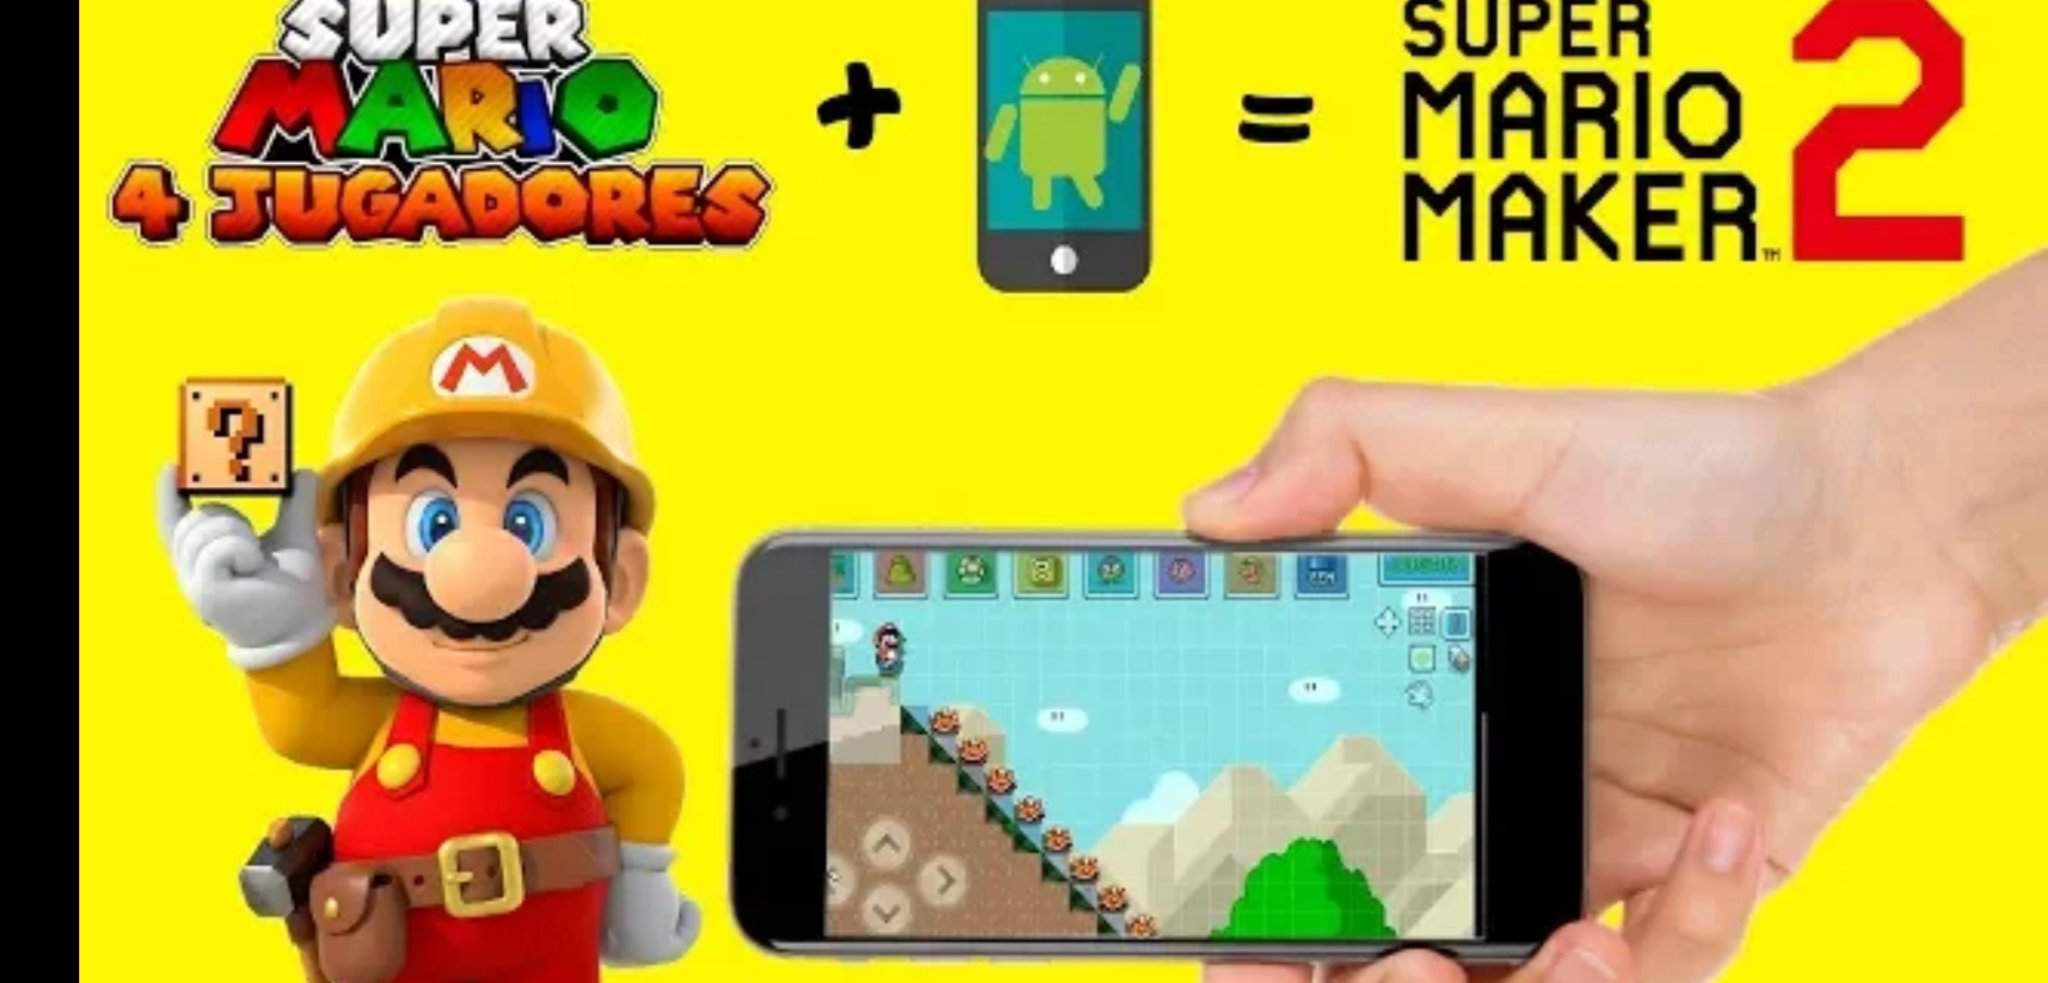 super mario maker free download for android